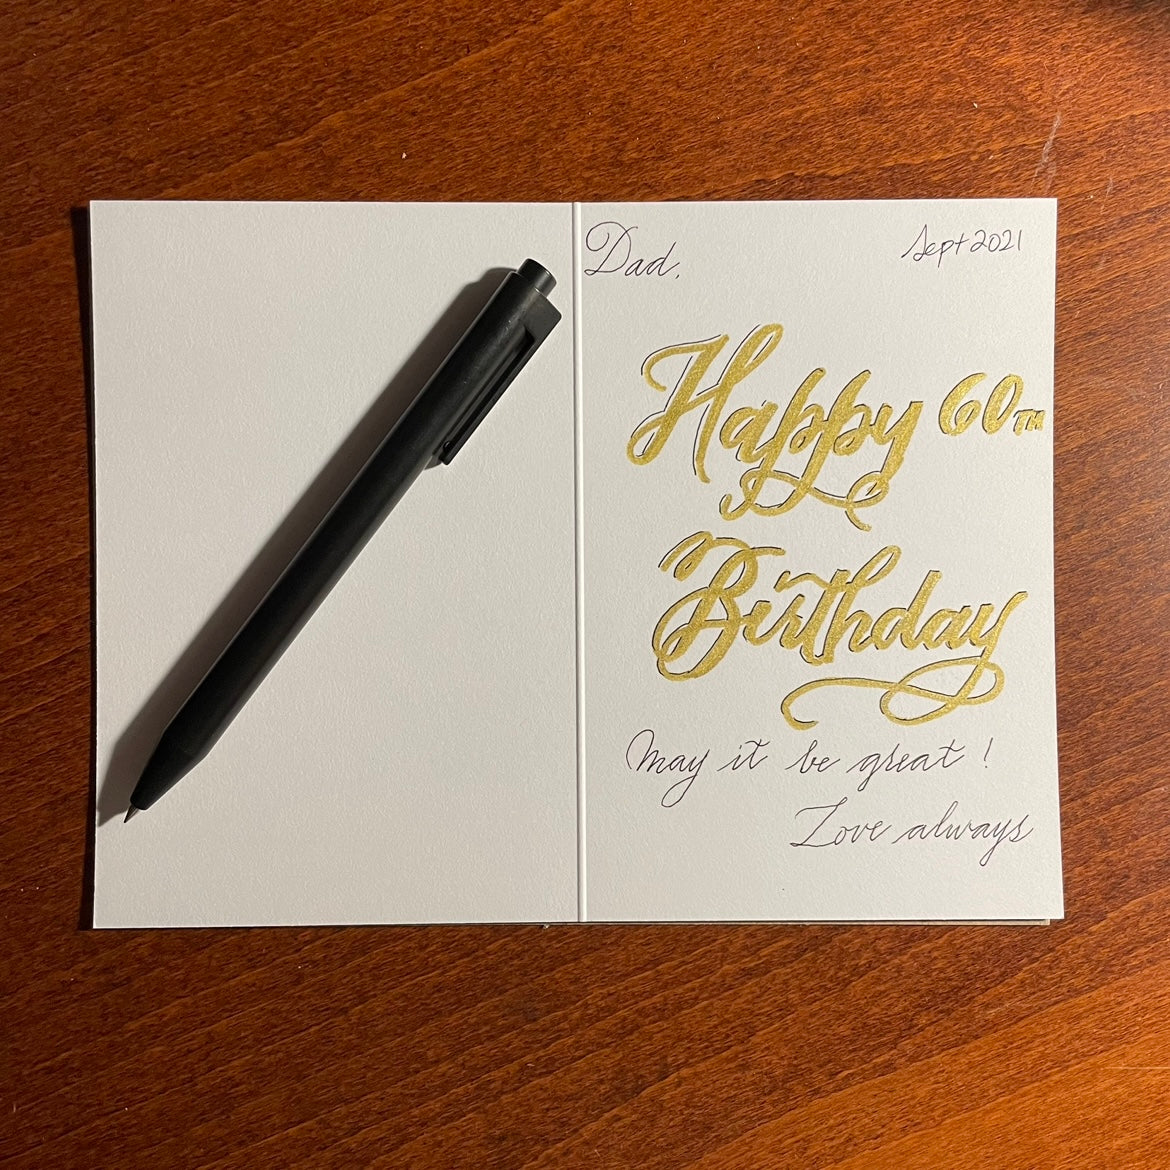 Add a handwritten calligraphy message and have it mailed on your behalf by Nibs and Scripts; Text: "Dad, Happy 60th Birthday, May it be great! Love always" | Calligraphy and Stationery, Nibs and Scripts